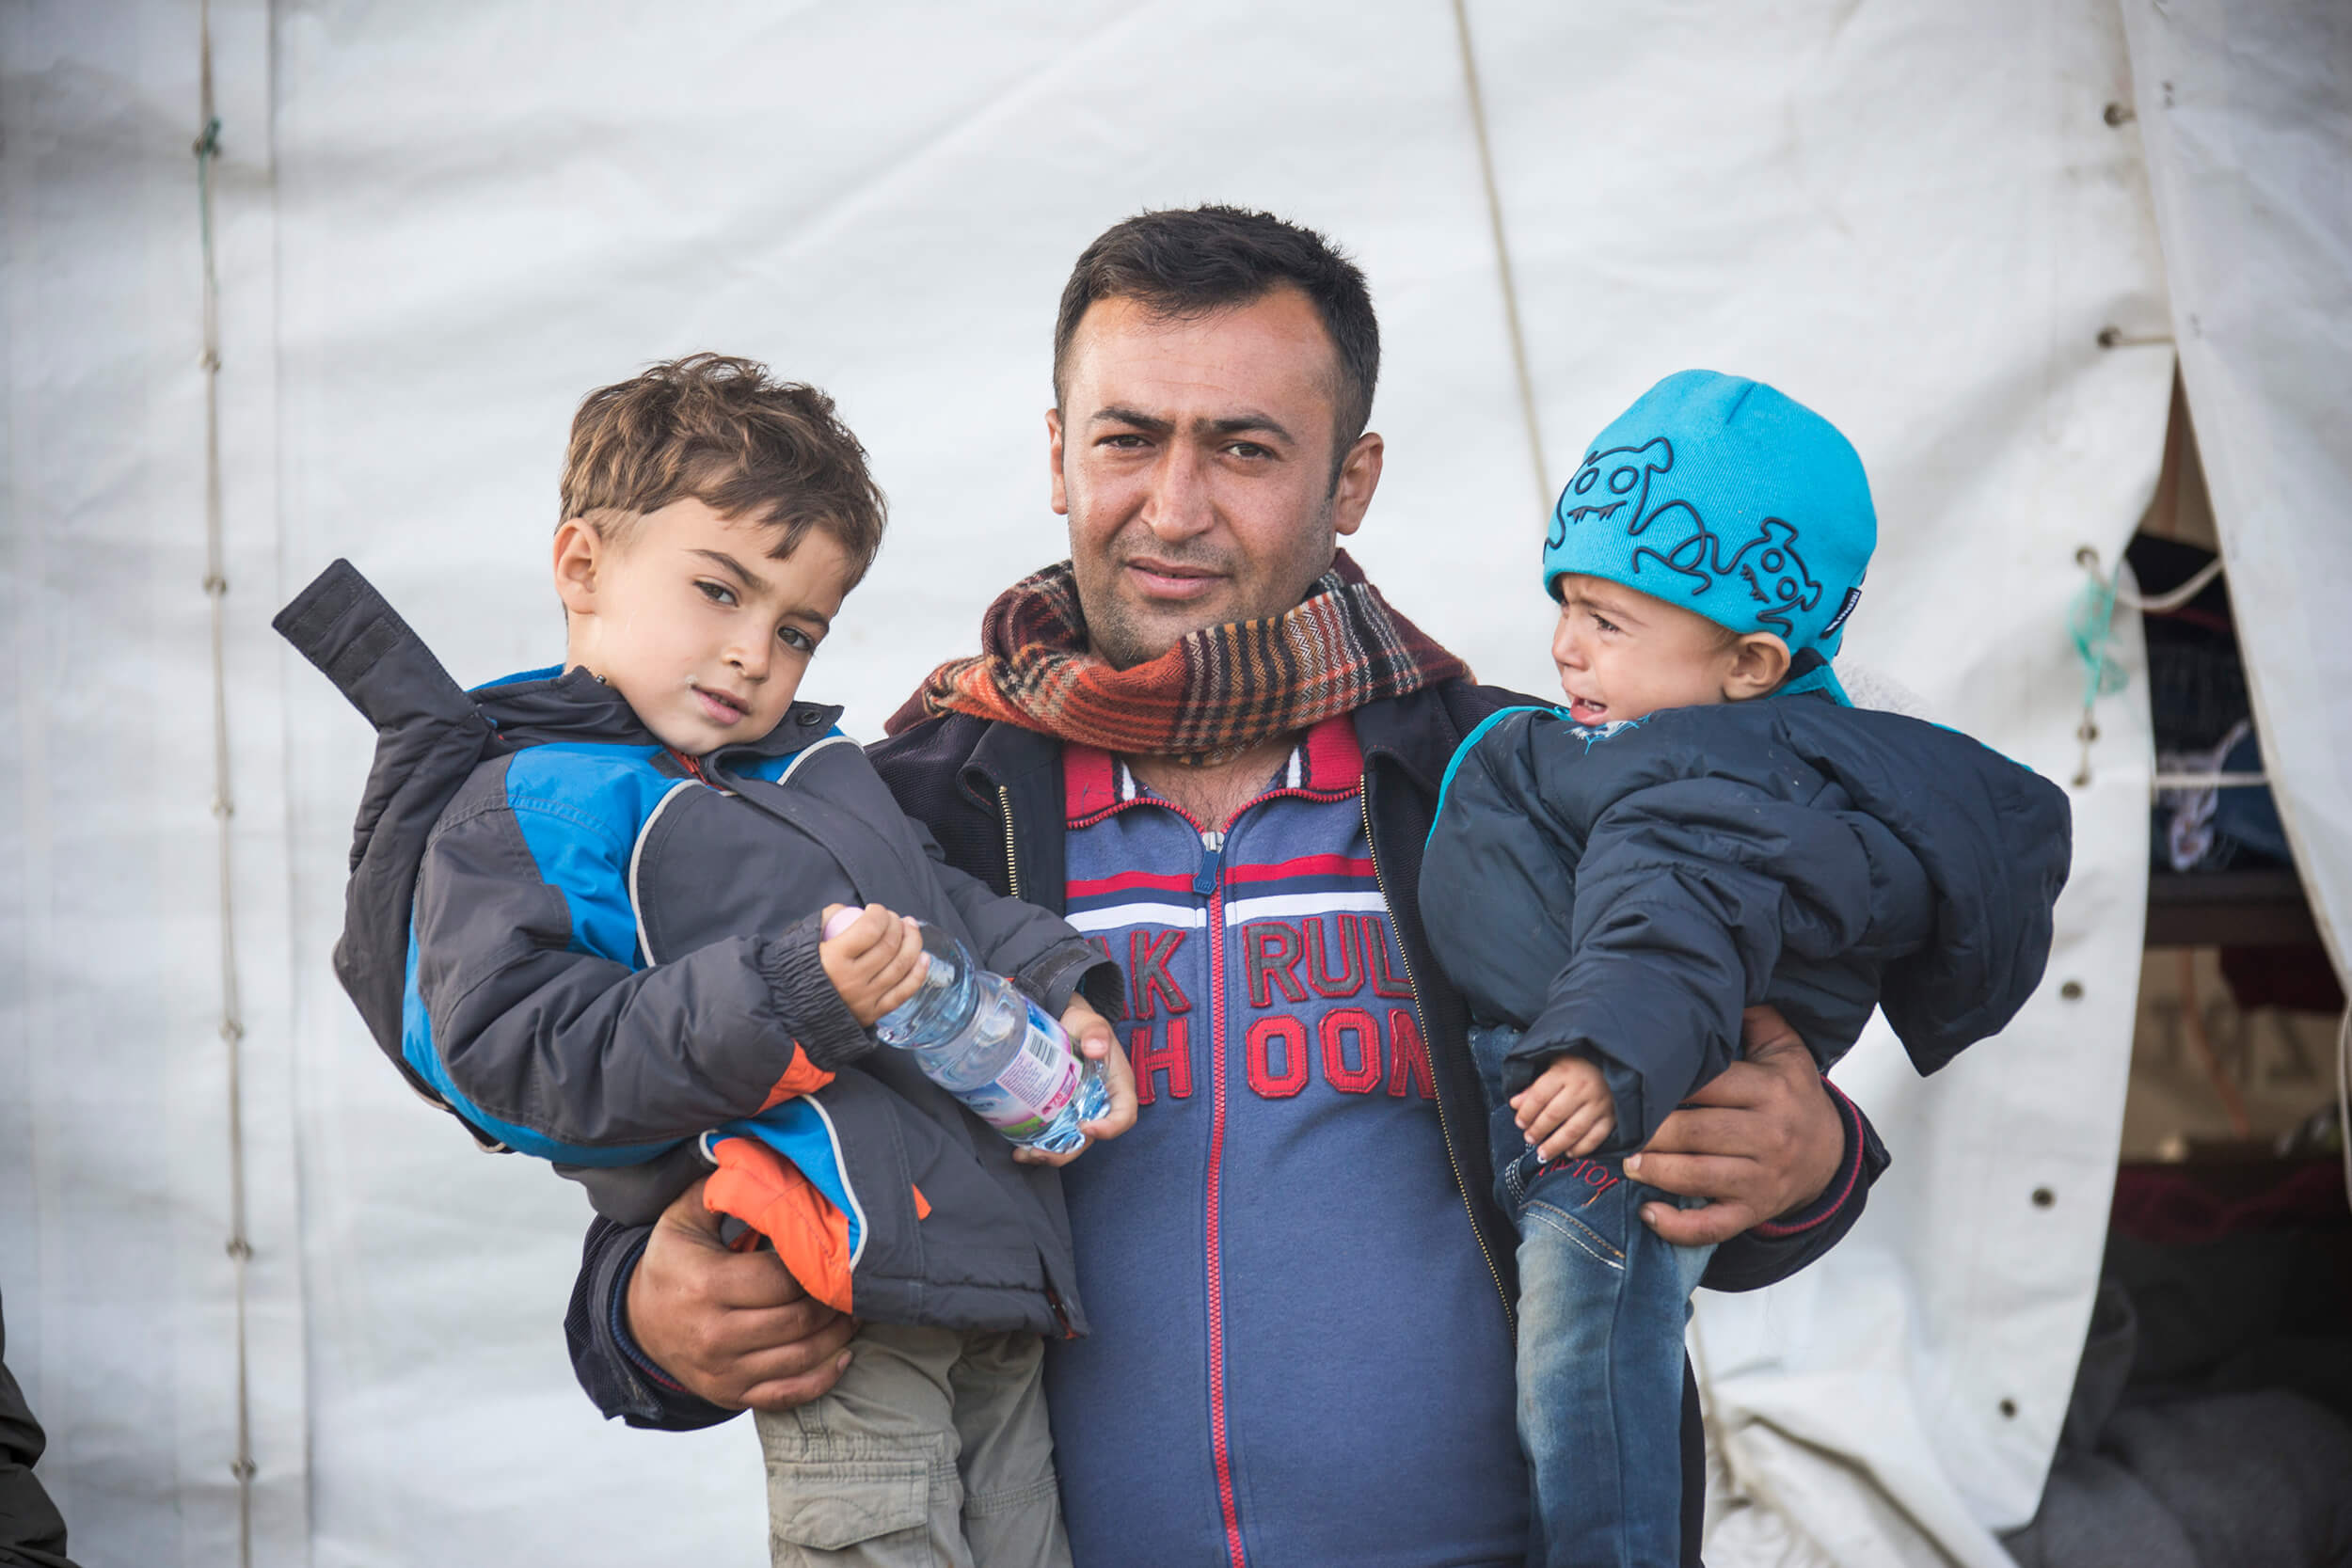  Hungaria,&nbsp;October 2015. Hegyeshalom. Zuhir Mahmoud, 33 years from Syria, two sons,&nbsp; 1.5 year and 5 years. Three kilometers walk to the border with Austria, to Nickelsdorf 